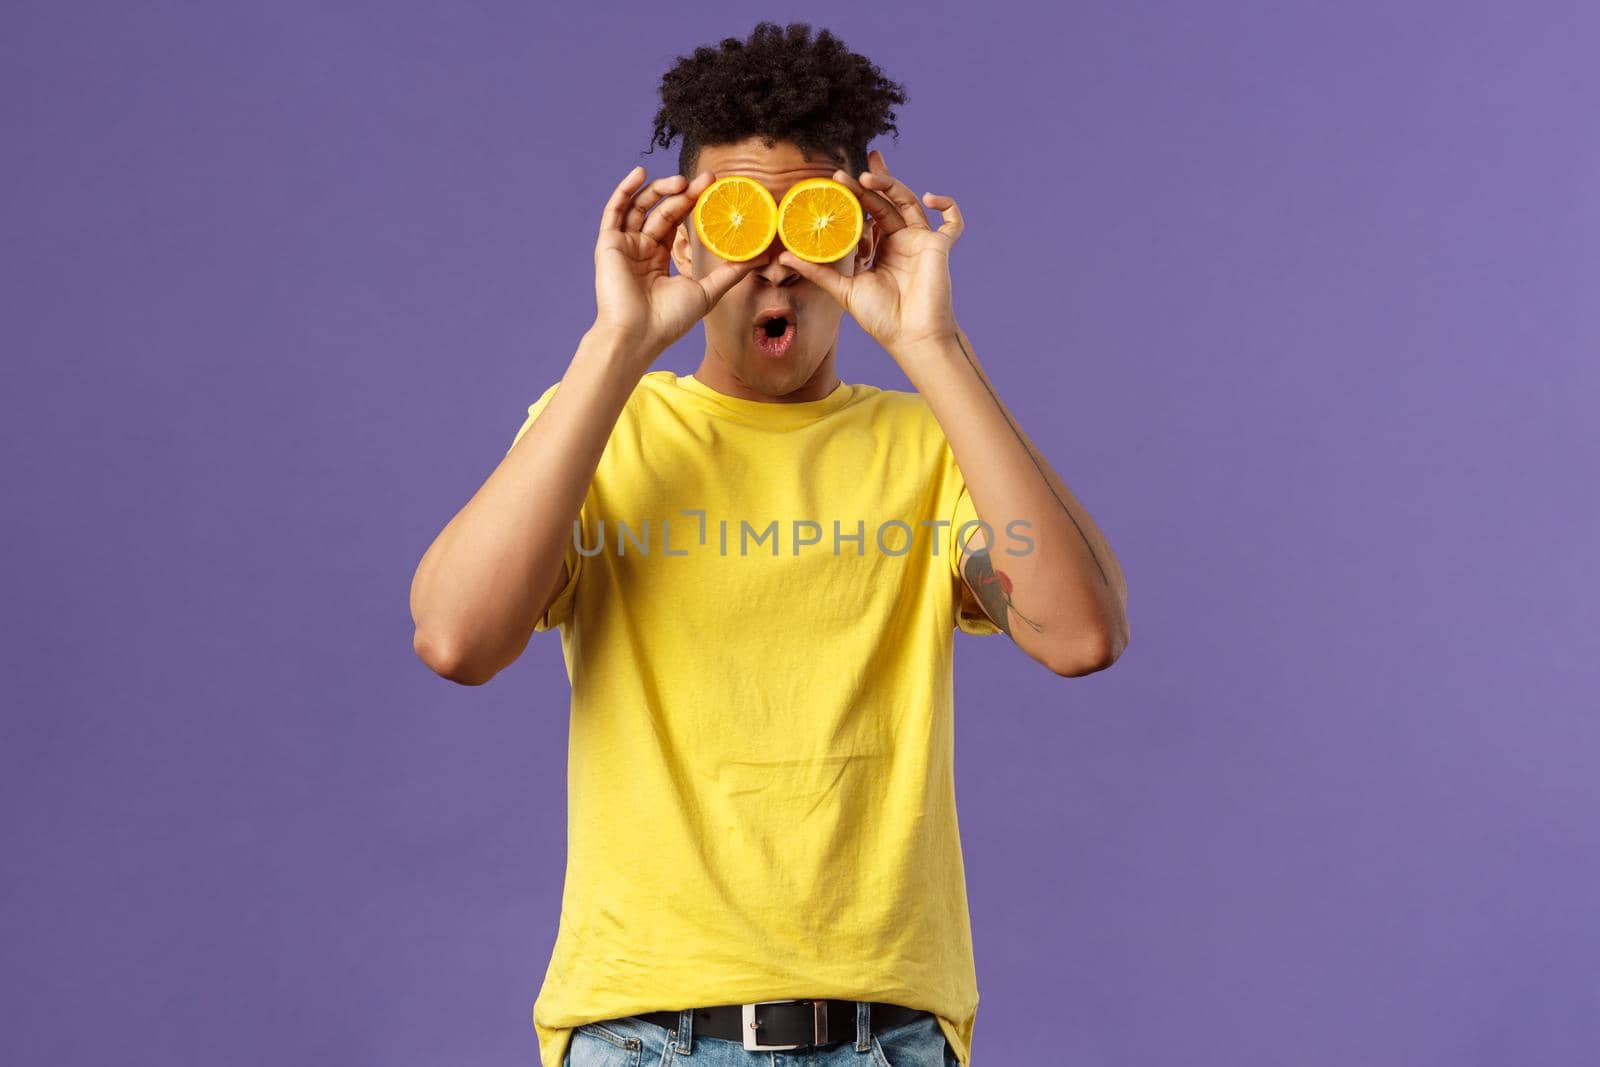 Holidays, vitamins and vacation concept. Portrait of funny, playful young guy fool around, playing with fruits, making eyes from pieces of orange, show wondered face expression, purple background.